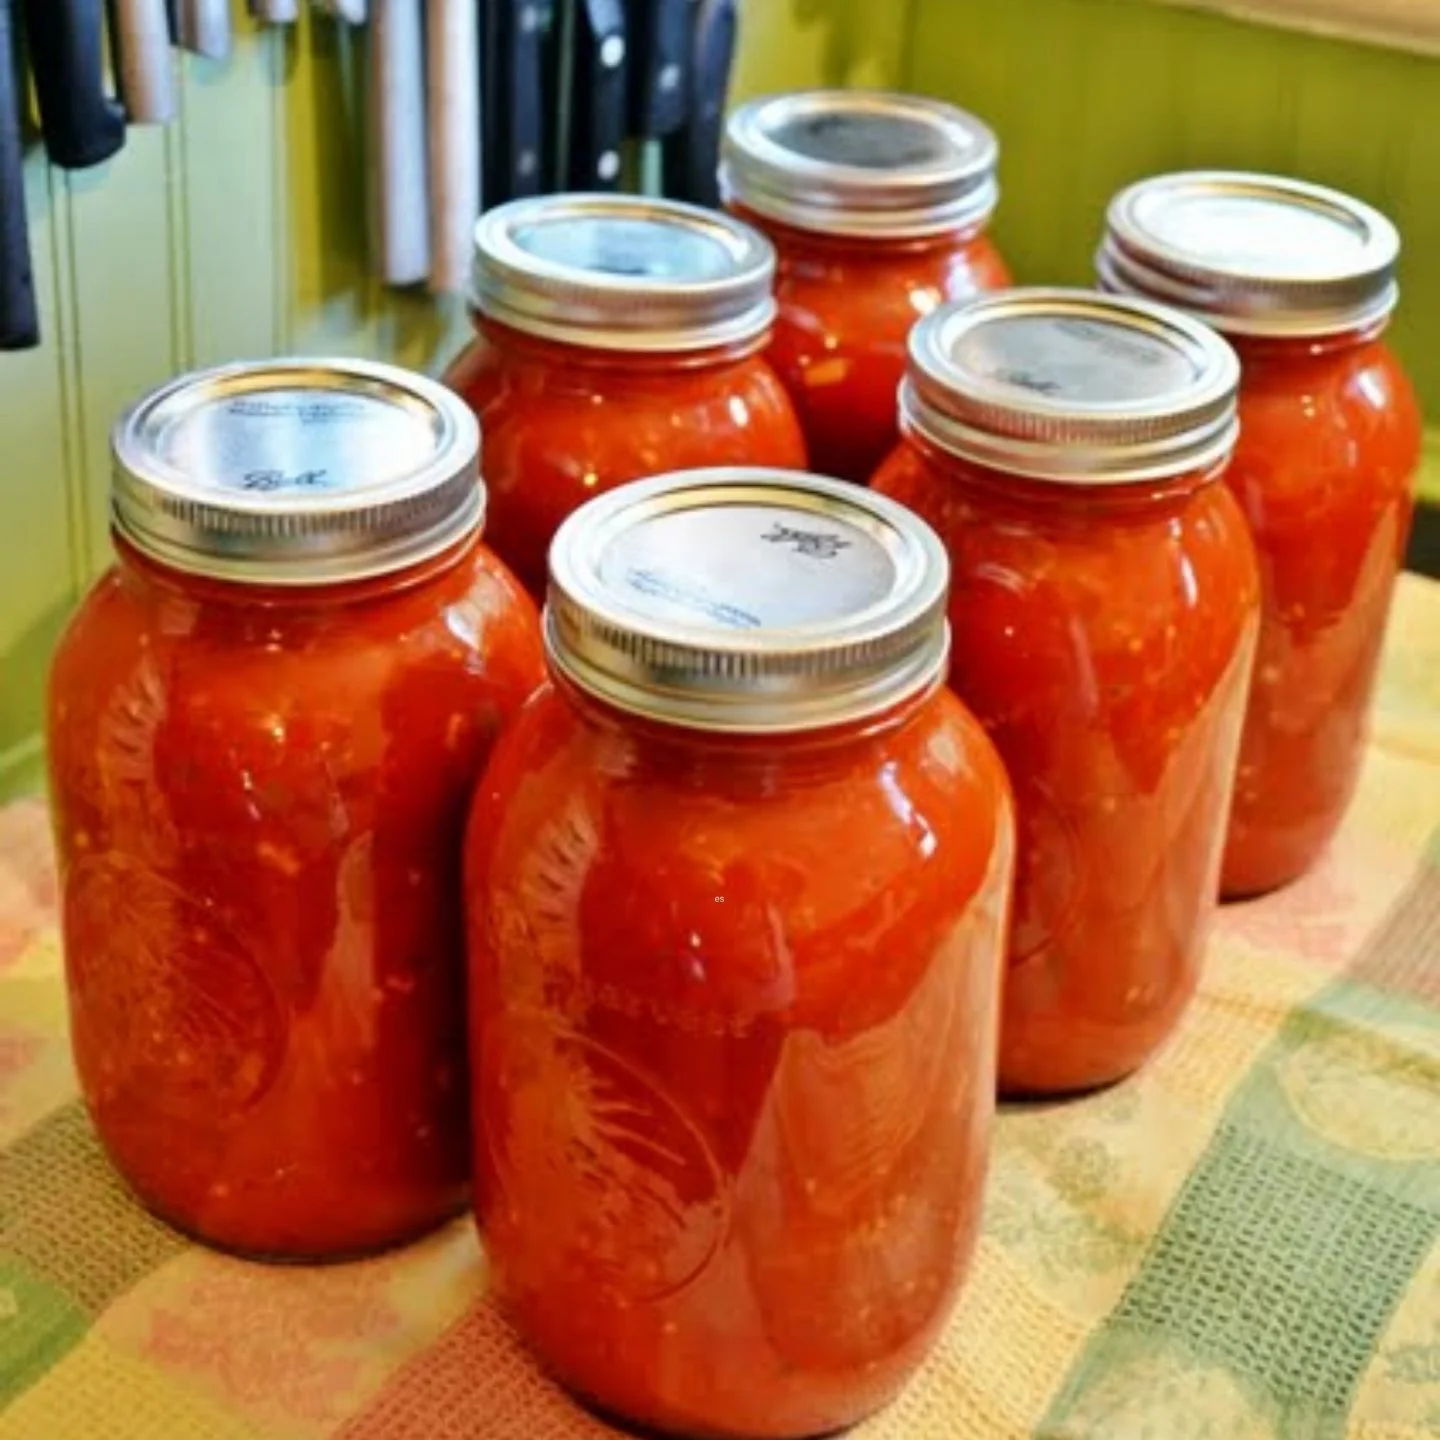 Homemade canned spaghetti sauce with fresh tomatoes